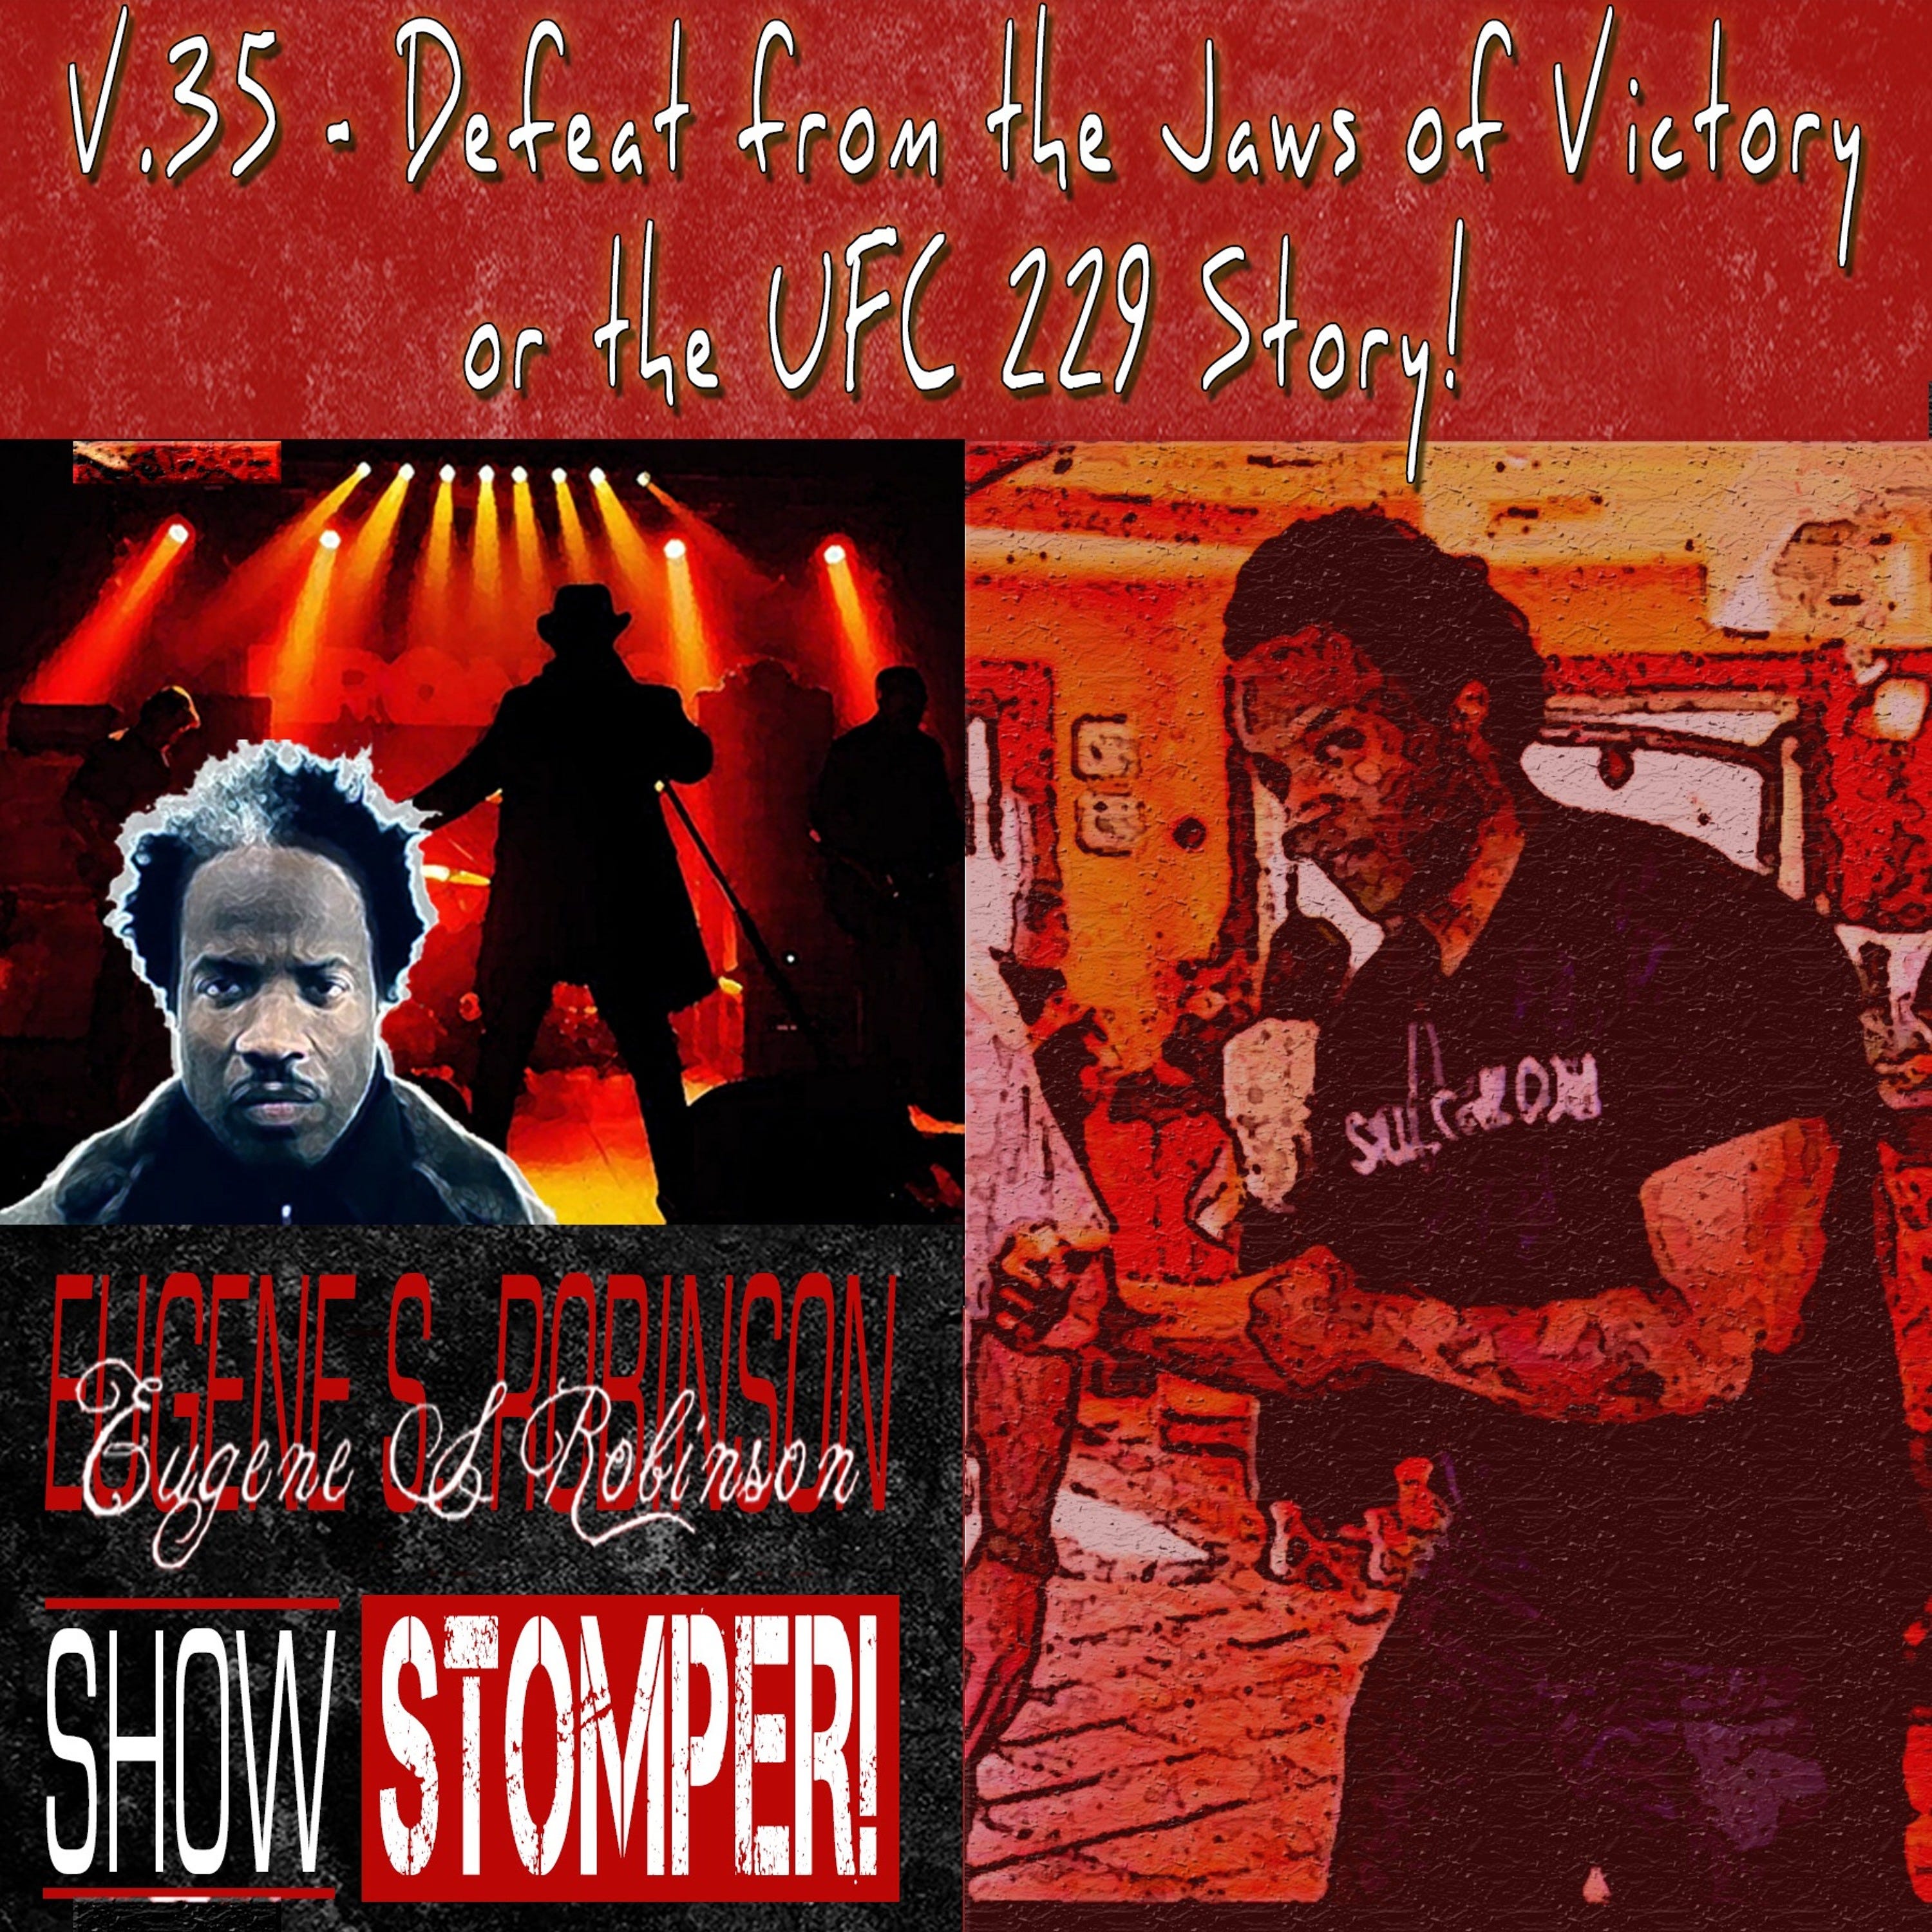 The Eugene S. Robinson Show Stomper! V.35 - Defeat From The Jaws Of Victory Or The UFC 229 Story!